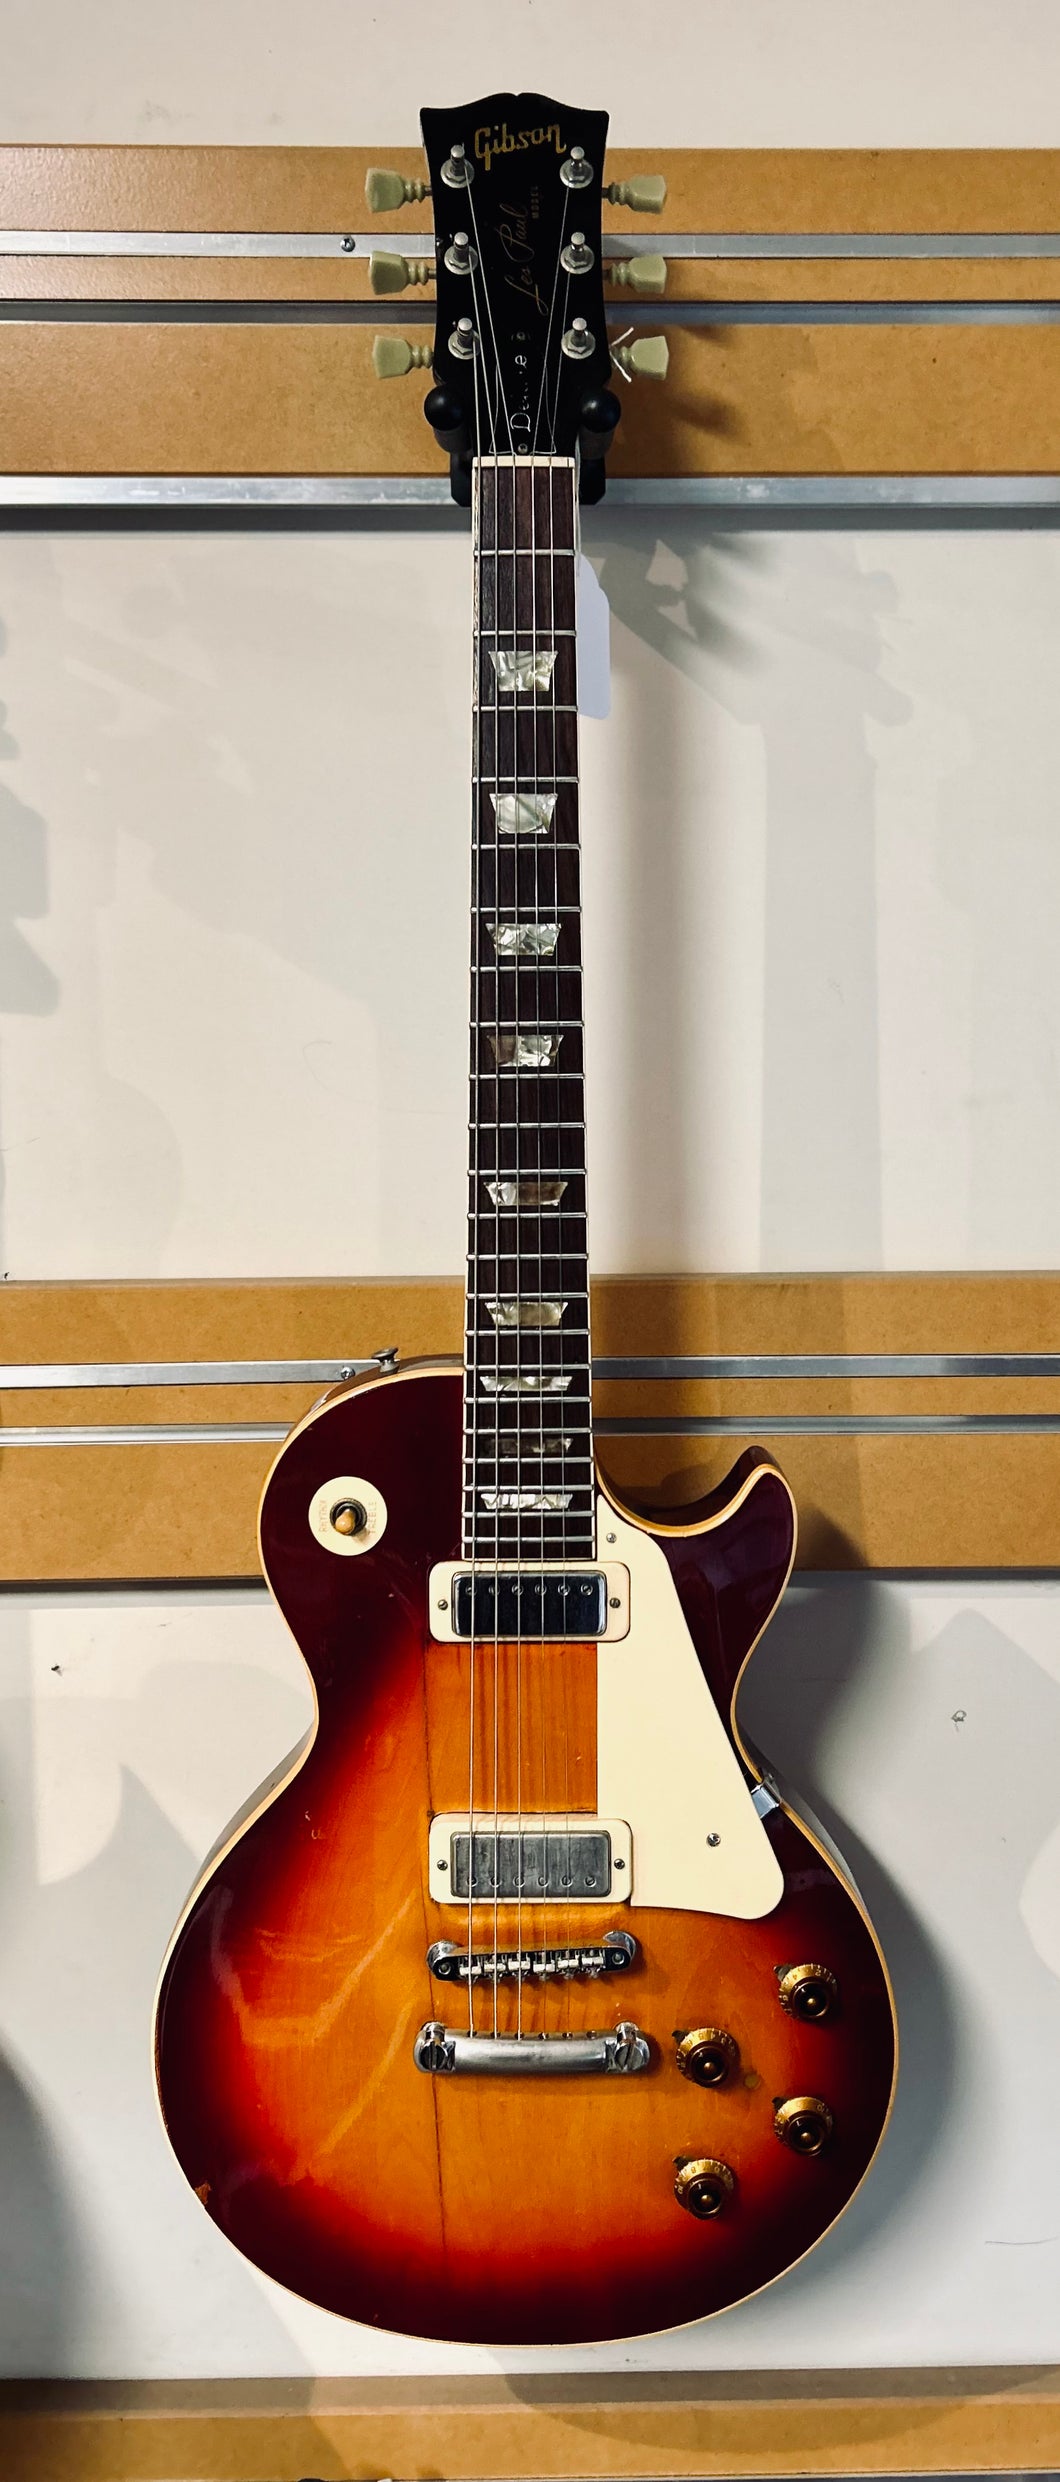 Gibson Les Paul Deluxe Circa 1974 CHerry Bursty in OHSC